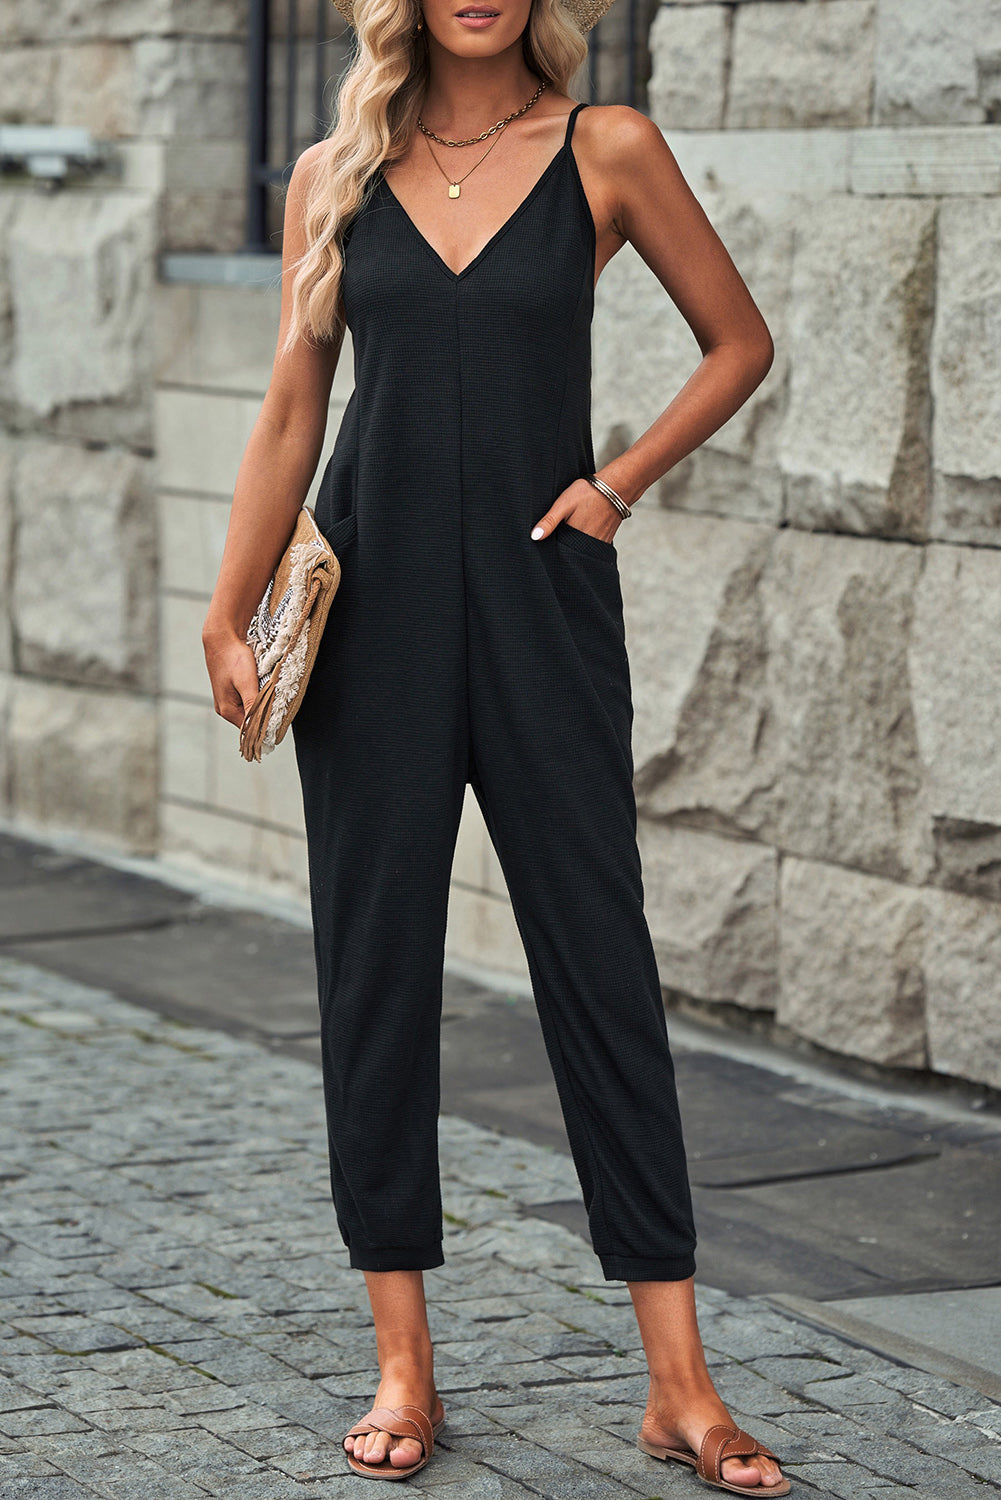 Black textured sleeveless v-neck pocketed casual jumpsuit - s / 95% polyester + 5% elastane - jumpsuits & rompers